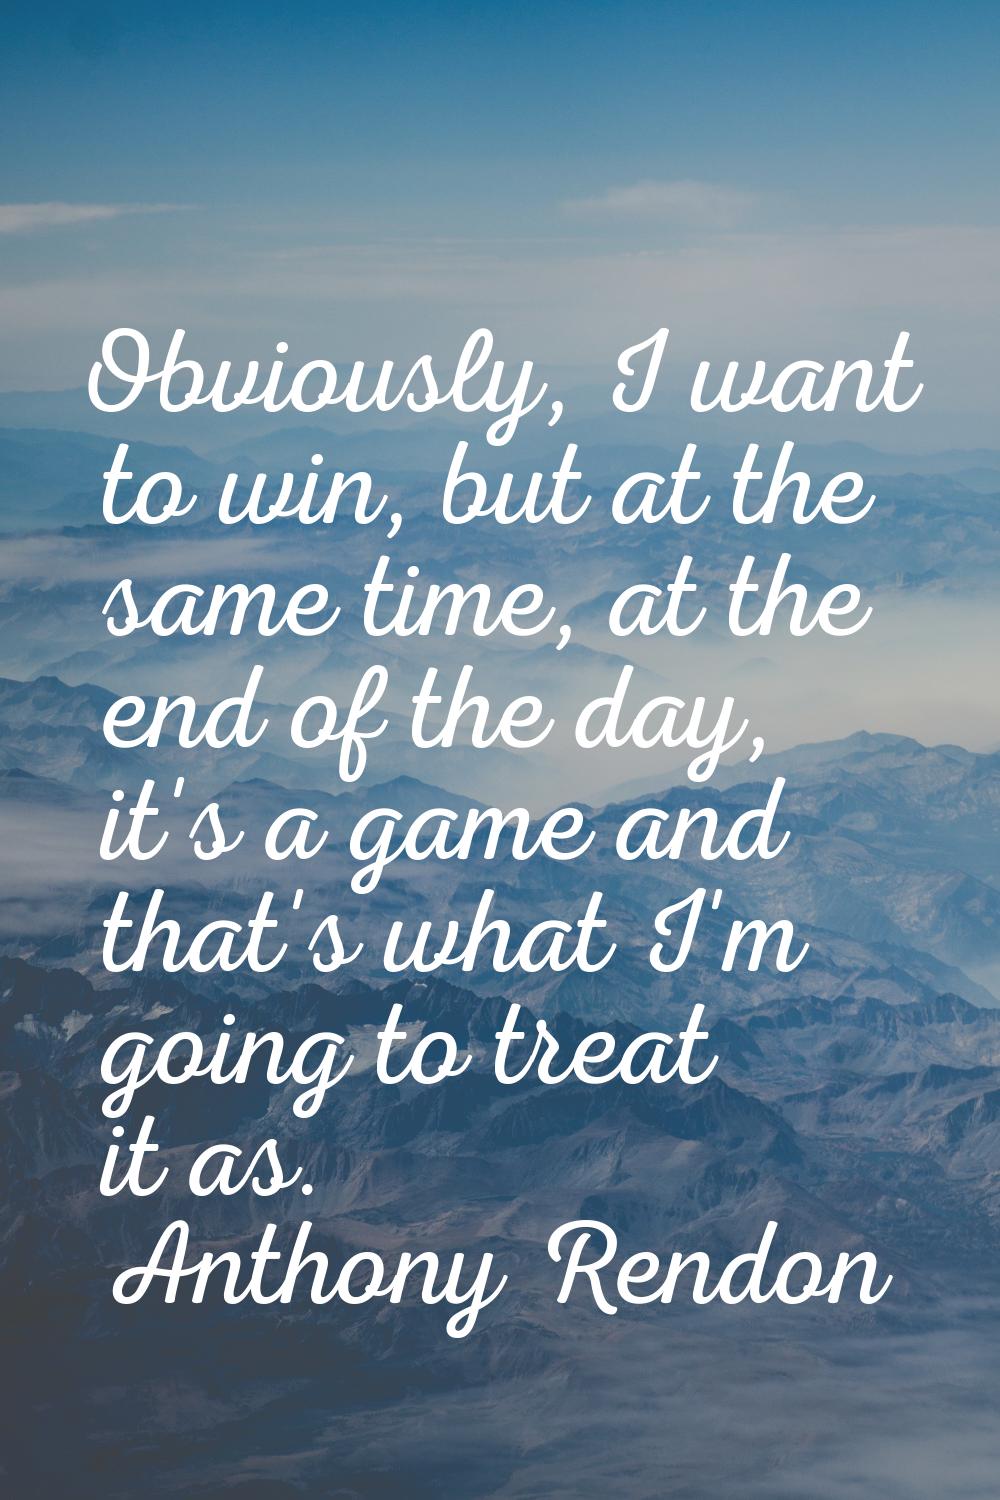 Obviously, I want to win, but at the same time, at the end of the day, it's a game and that's what 